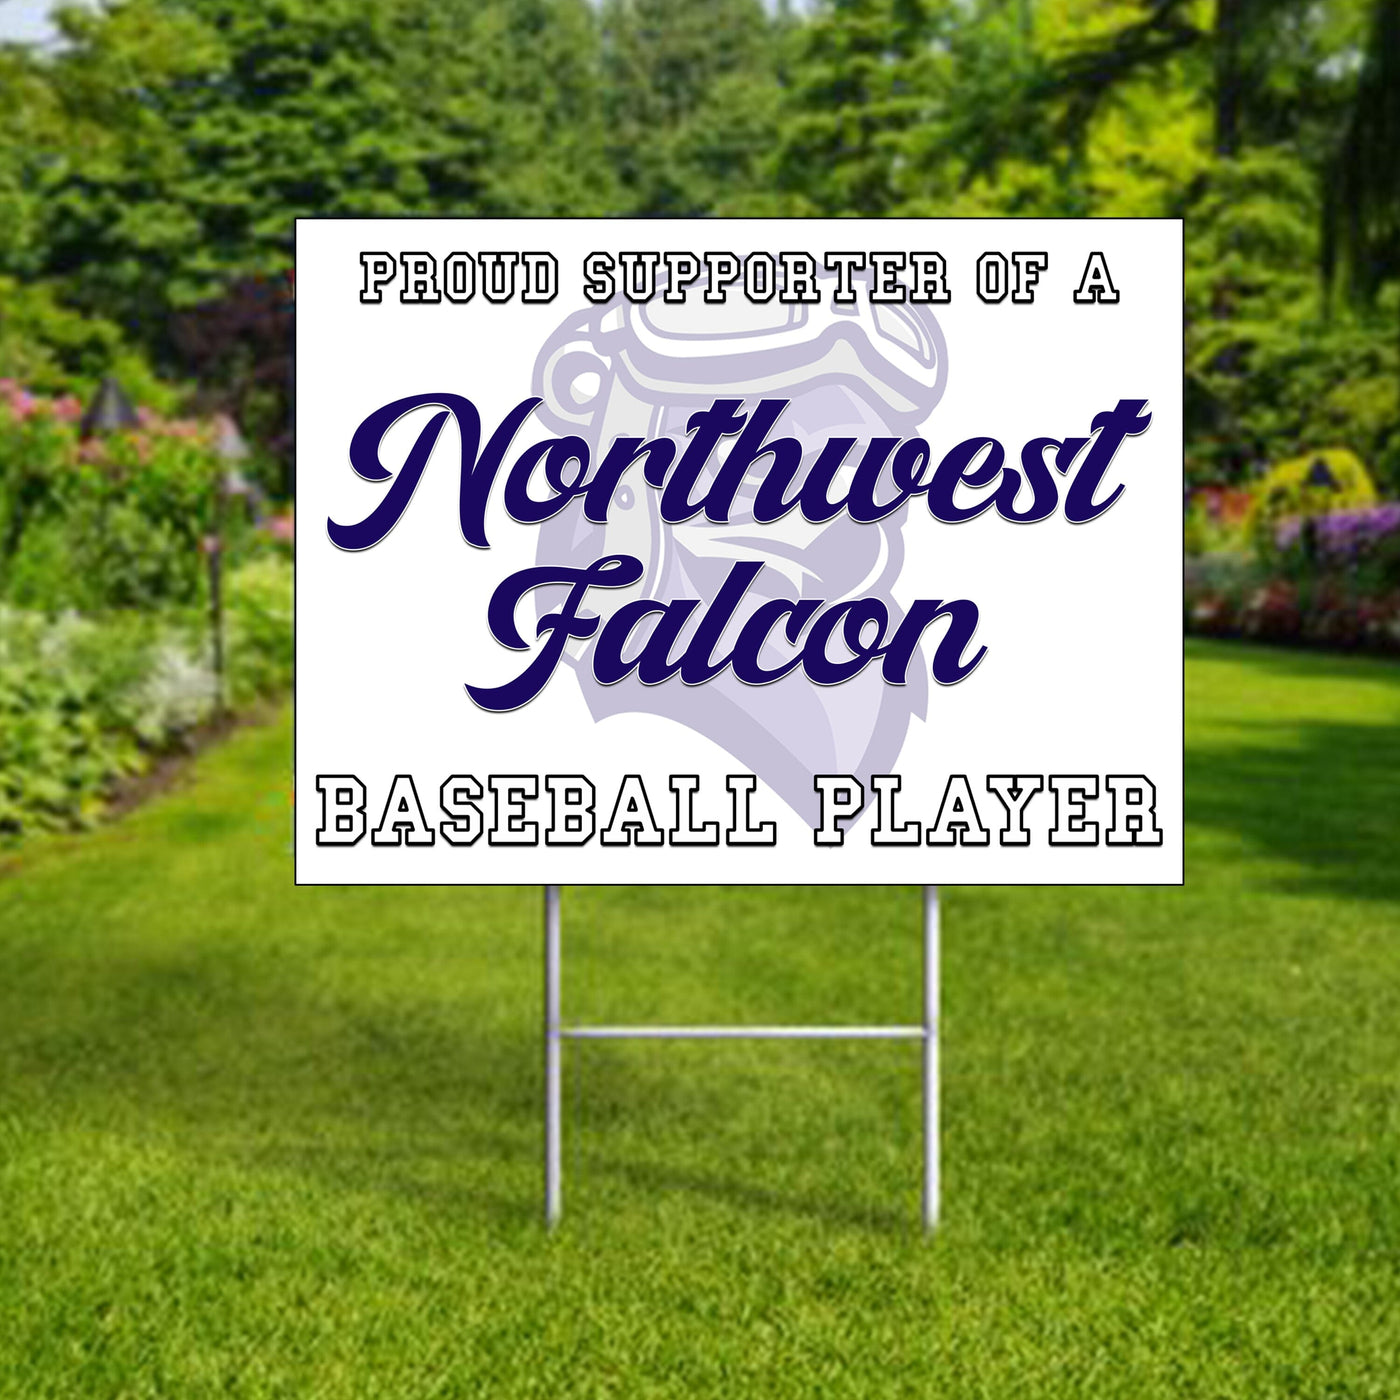 Personalized yard sign for Lincoln Northwest Falcons sports team player. The sign features the team logo in the center, surrounded by a background in team colors.